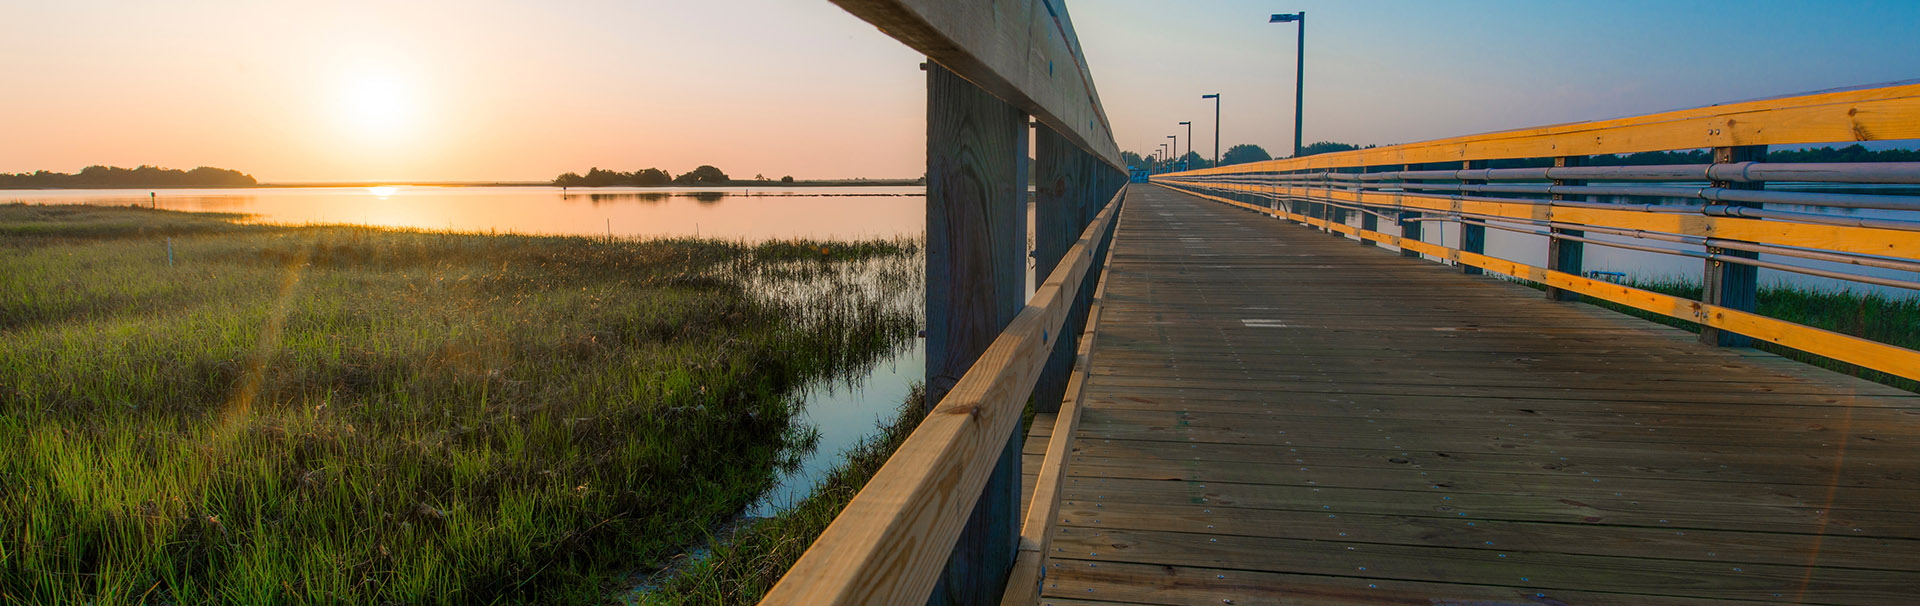 Pier on the Marshes at sunset